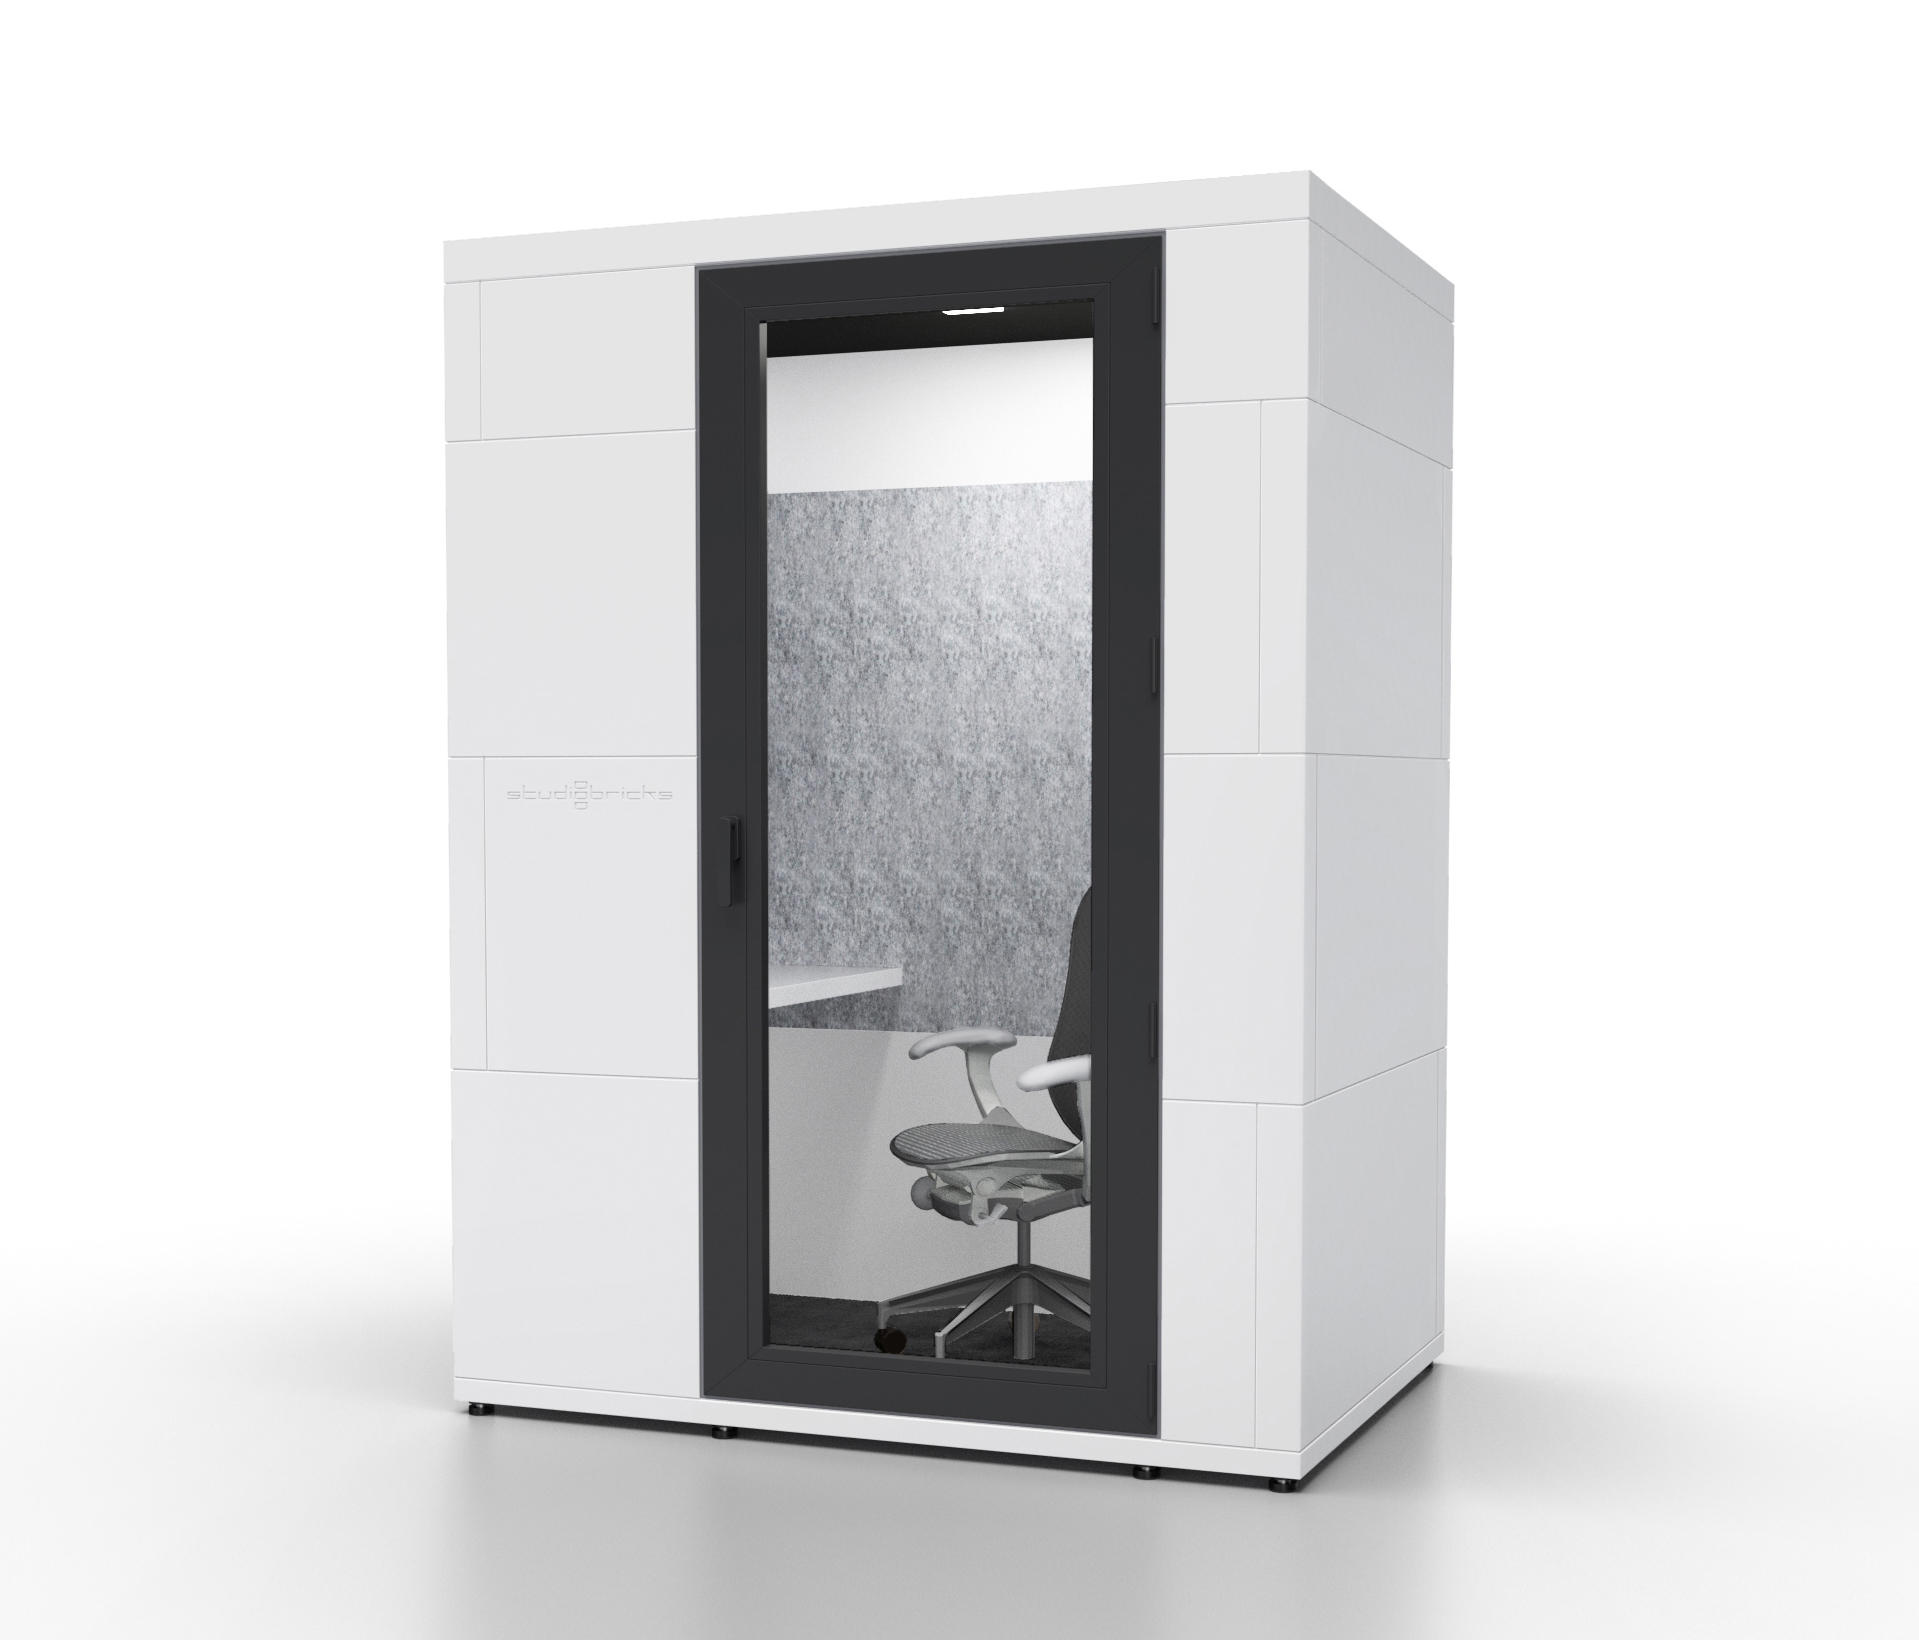 working booths | focus + | Architonic